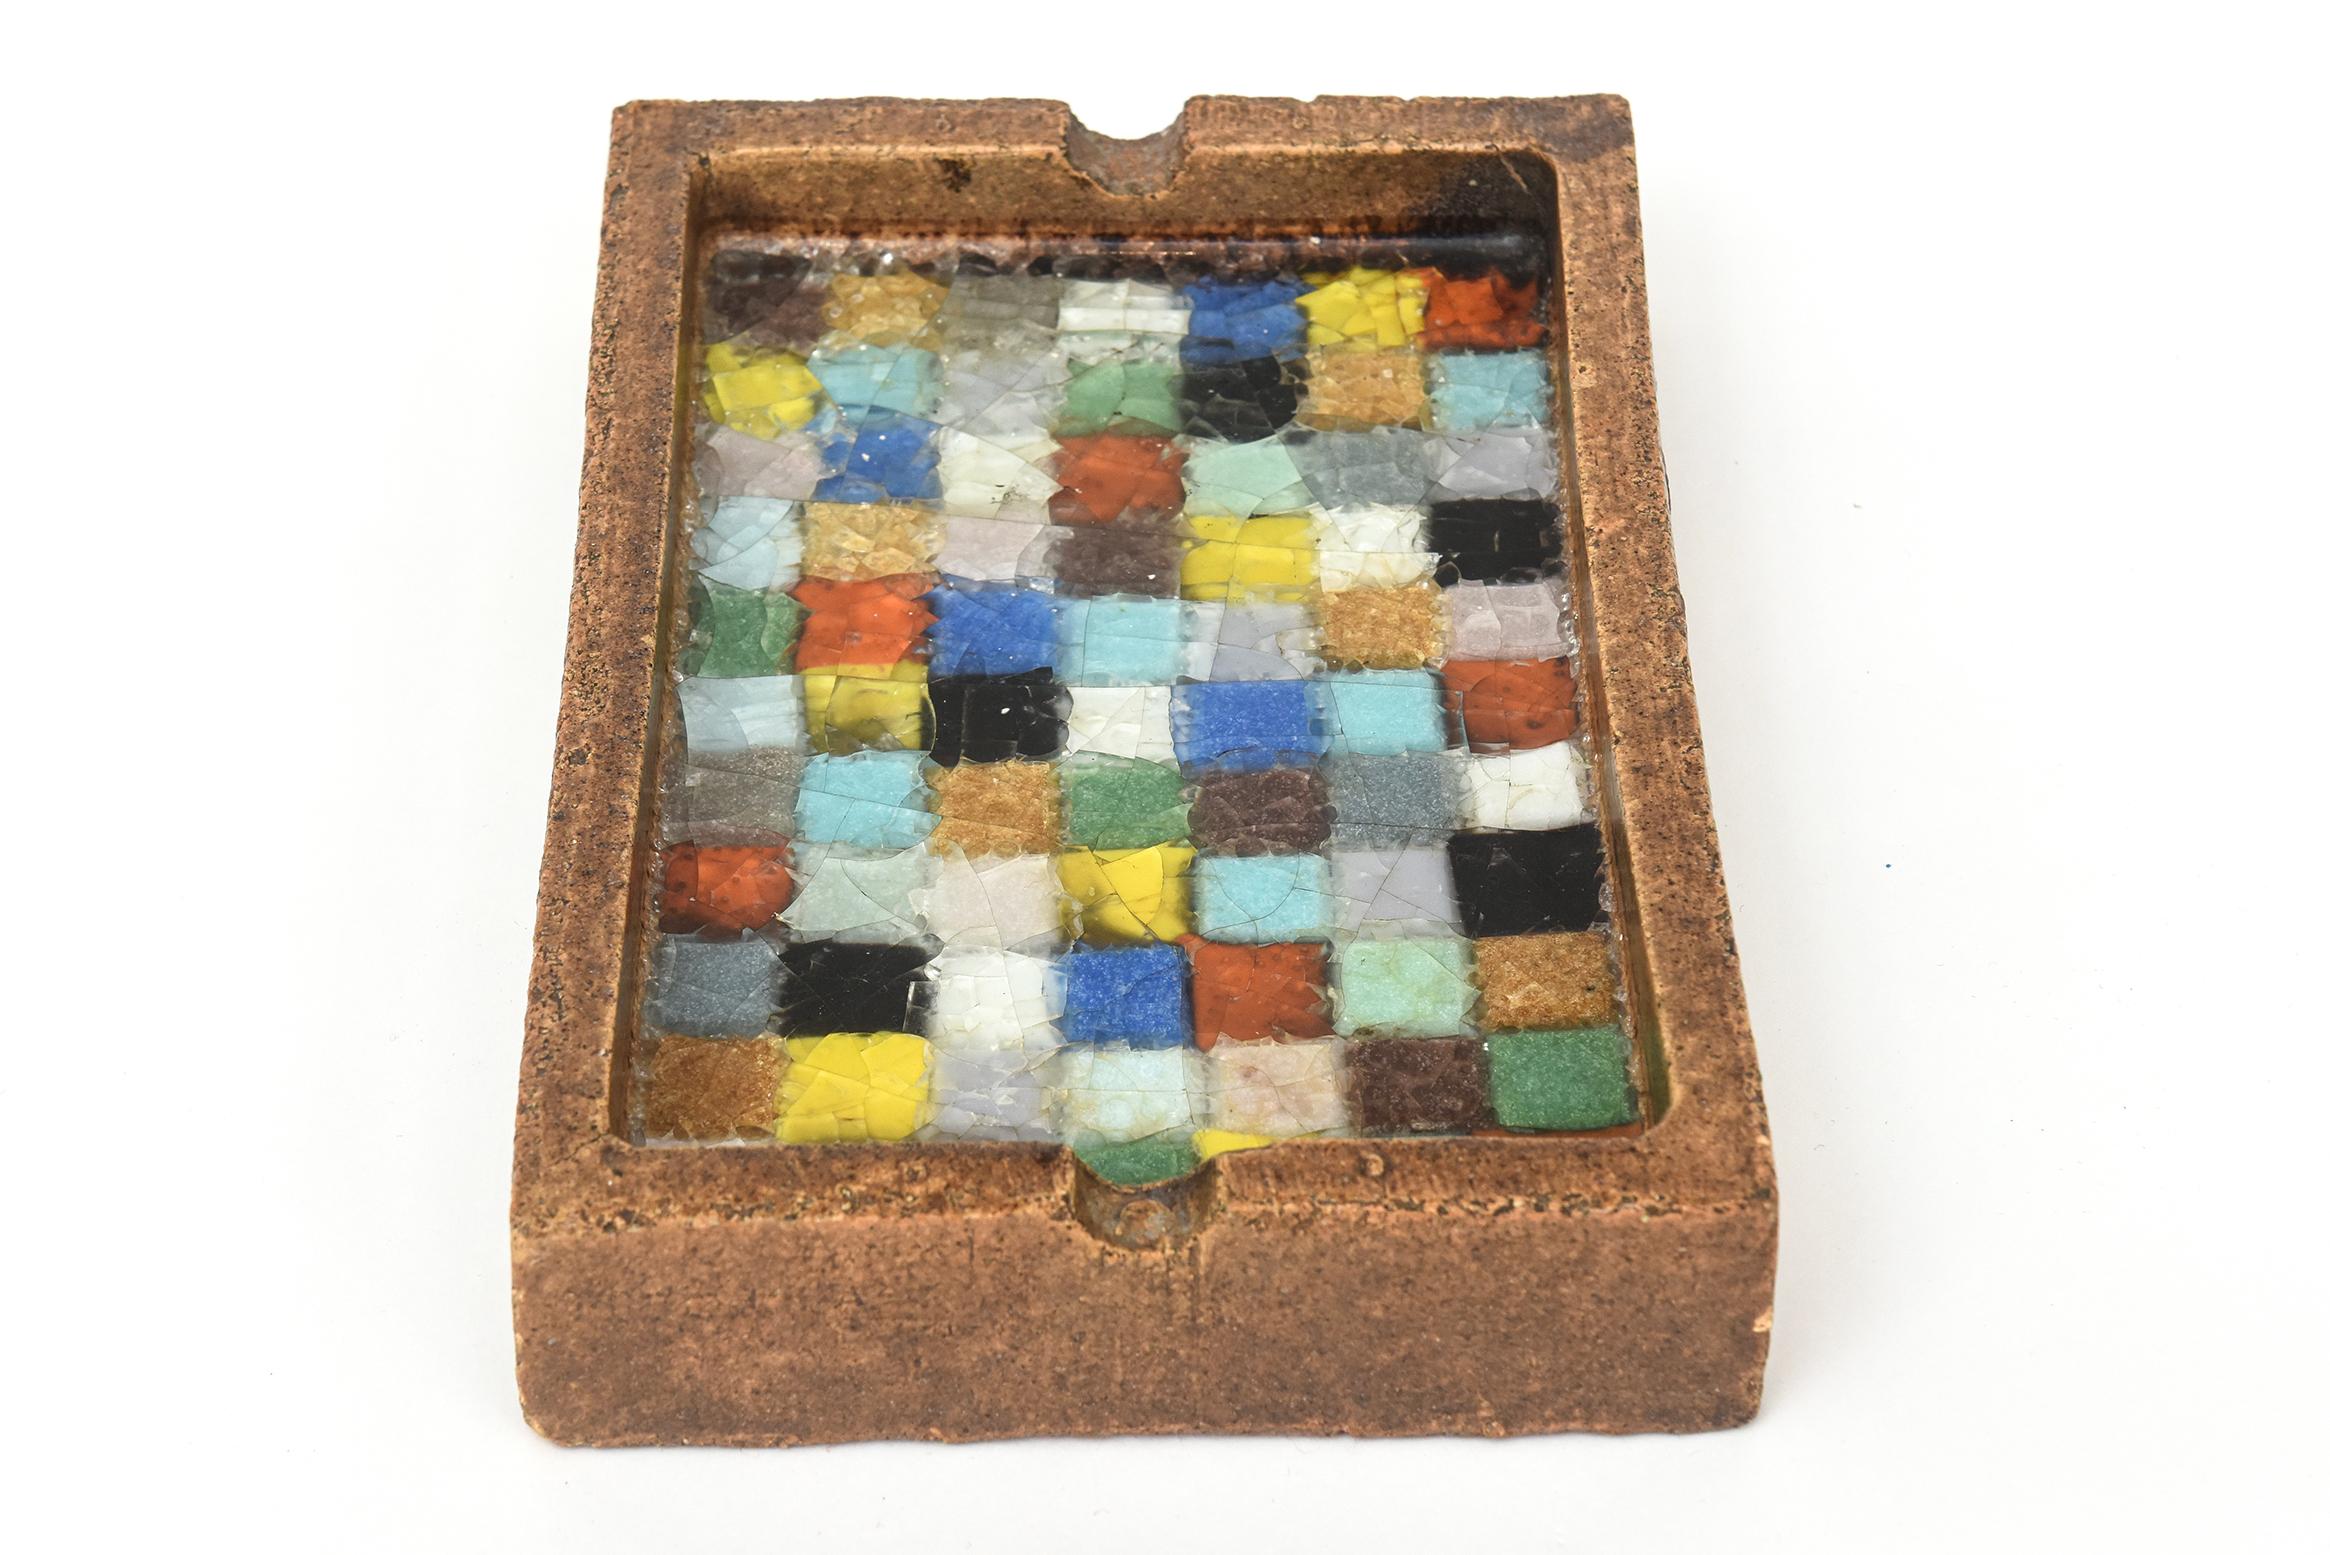 Mid-Century Modern 60s Italian Ceramic and Fused Glass Mosaic Ashtray / Tray by Bitossi for Raymor For Sale